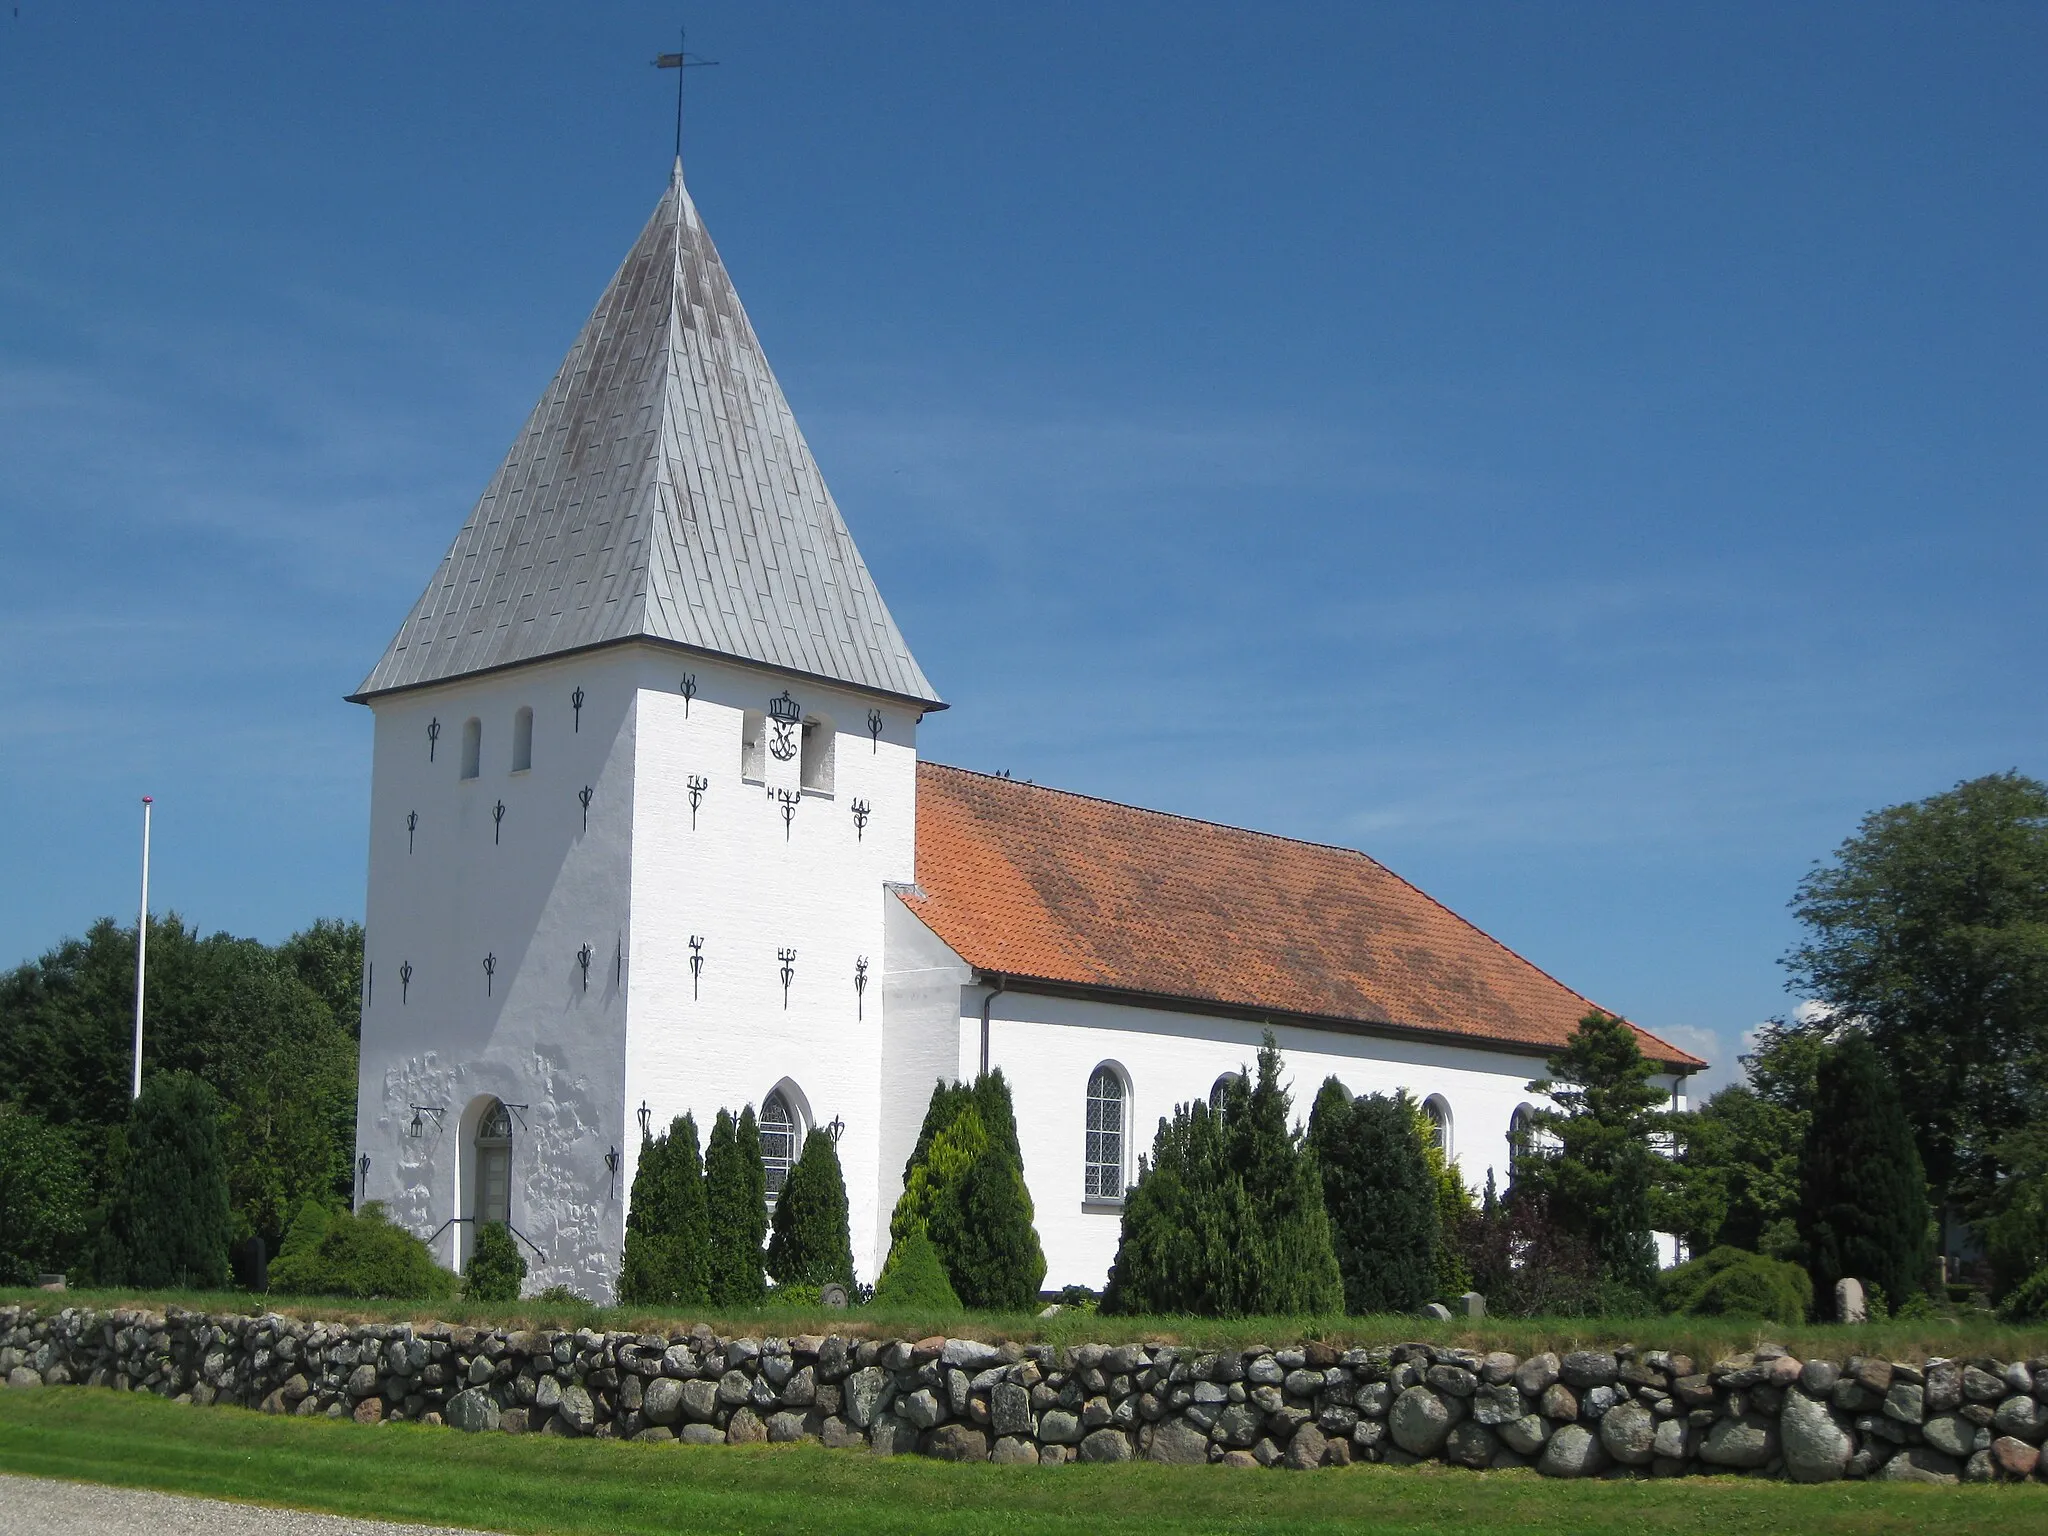 Photo showing: The church "Vejstrup Kirke" in the village "Sjølund". The village is located in South-Central Jutland (in south Denmark).